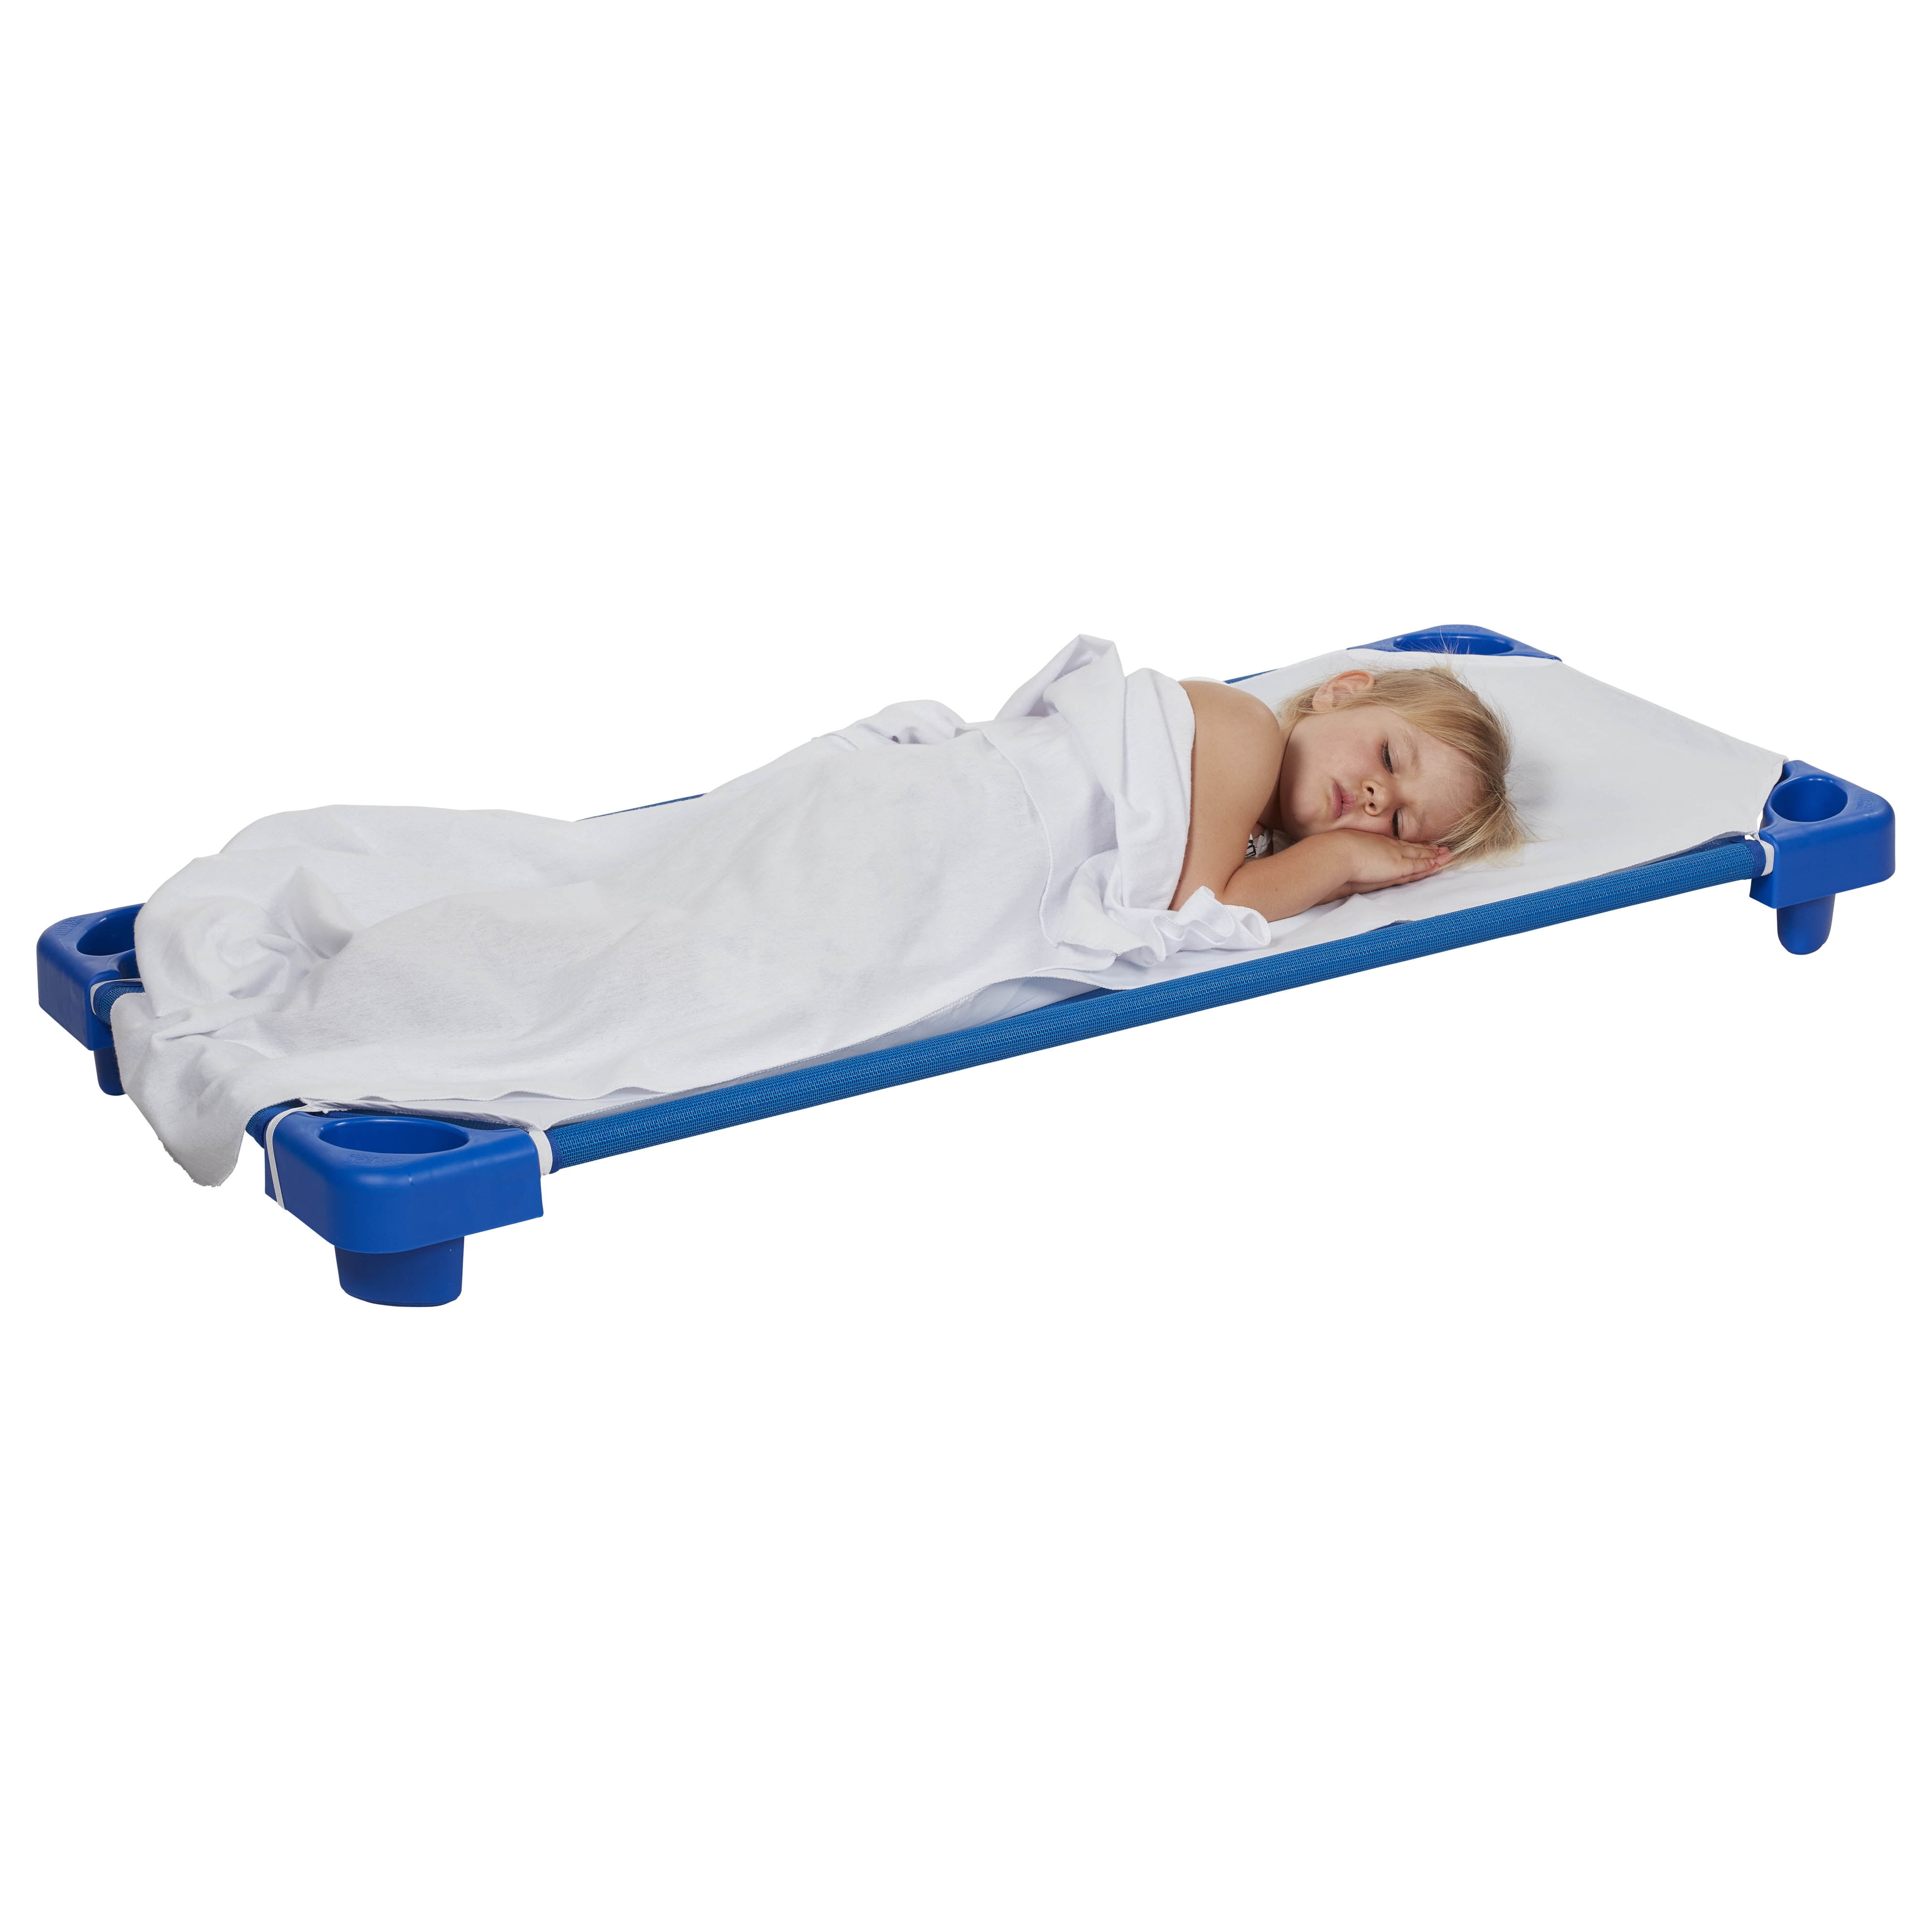 ECR4Kids Children’s Naptime Cot, Stackable Heavy-Duty Cot Bed,  Ready-to-Assemble, 6-Pack - Blue